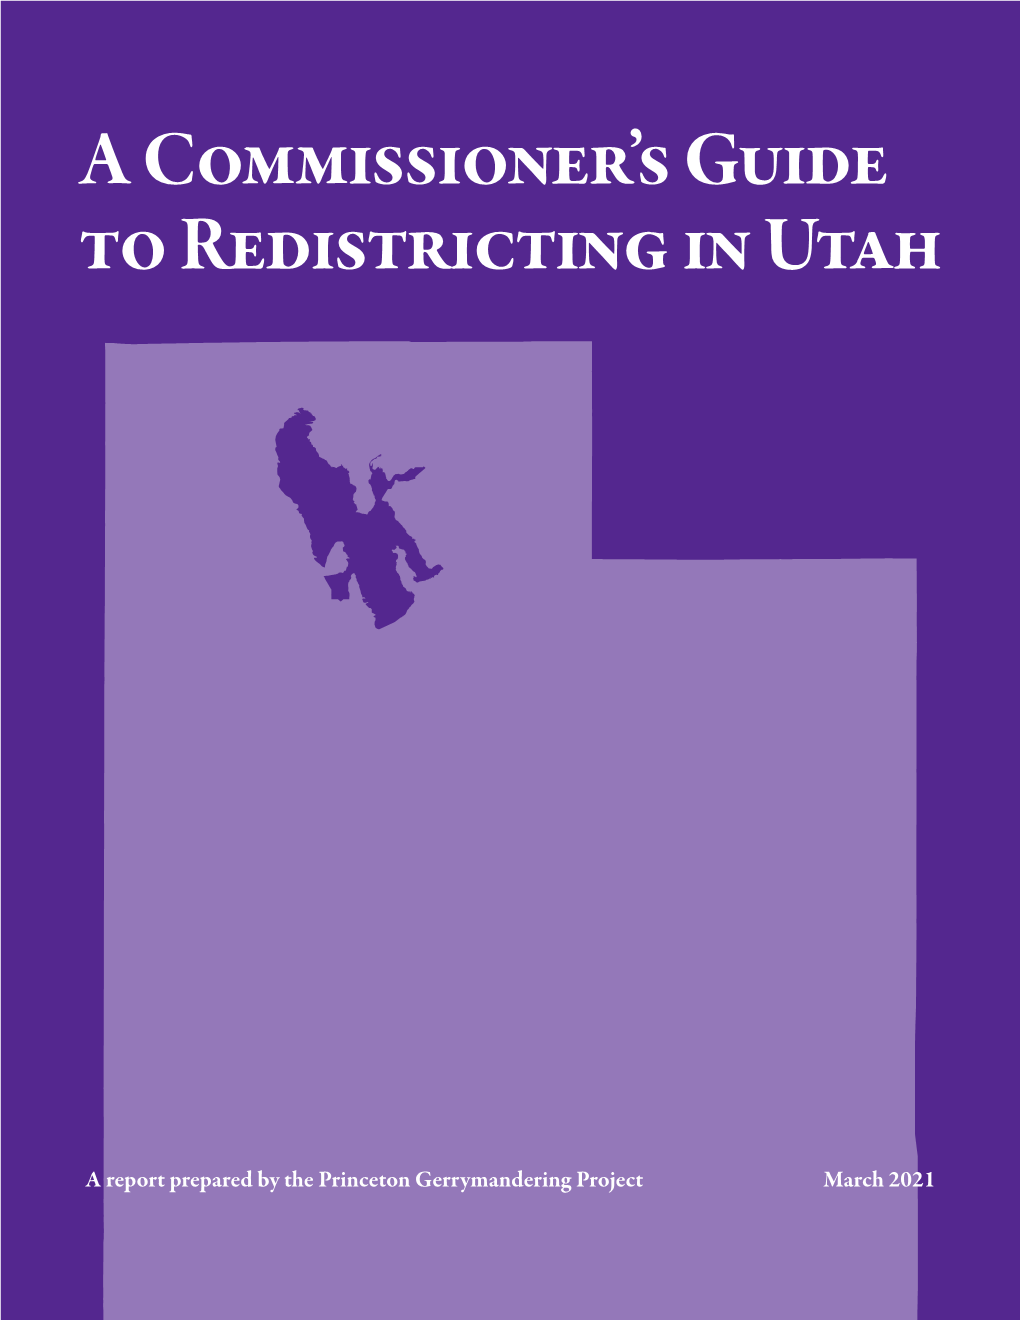 A Commissioner's Guide to Redistricting in Utah